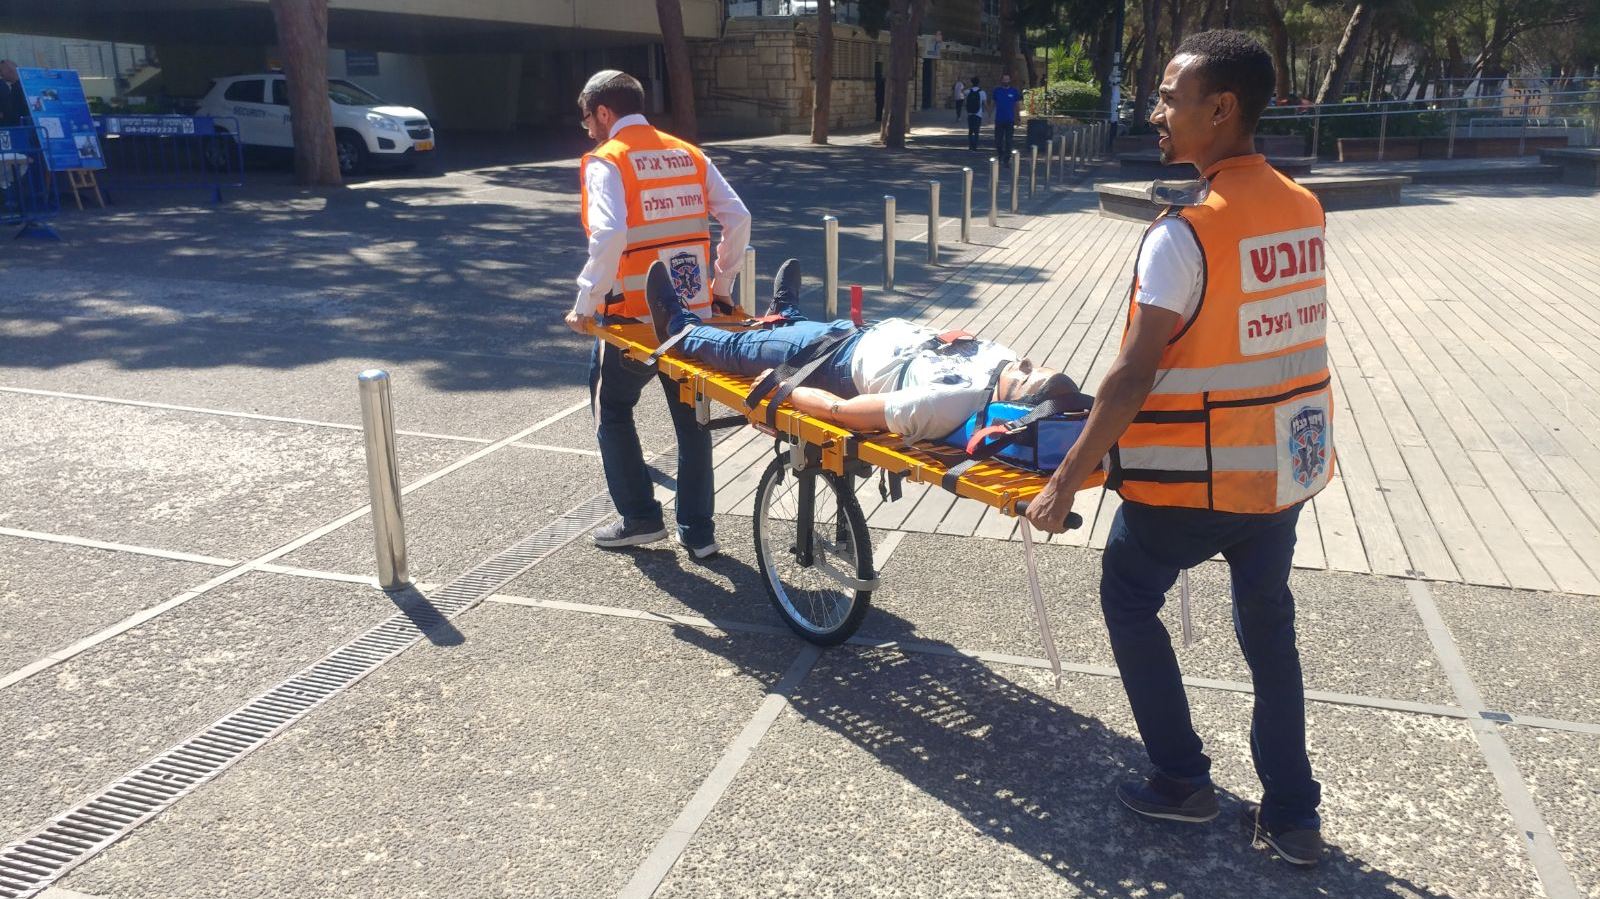 Michael Adda, left, and Ro’ee Etyanash testing their innovative stretcher at the Technion in Haifa. Photo: courtesy